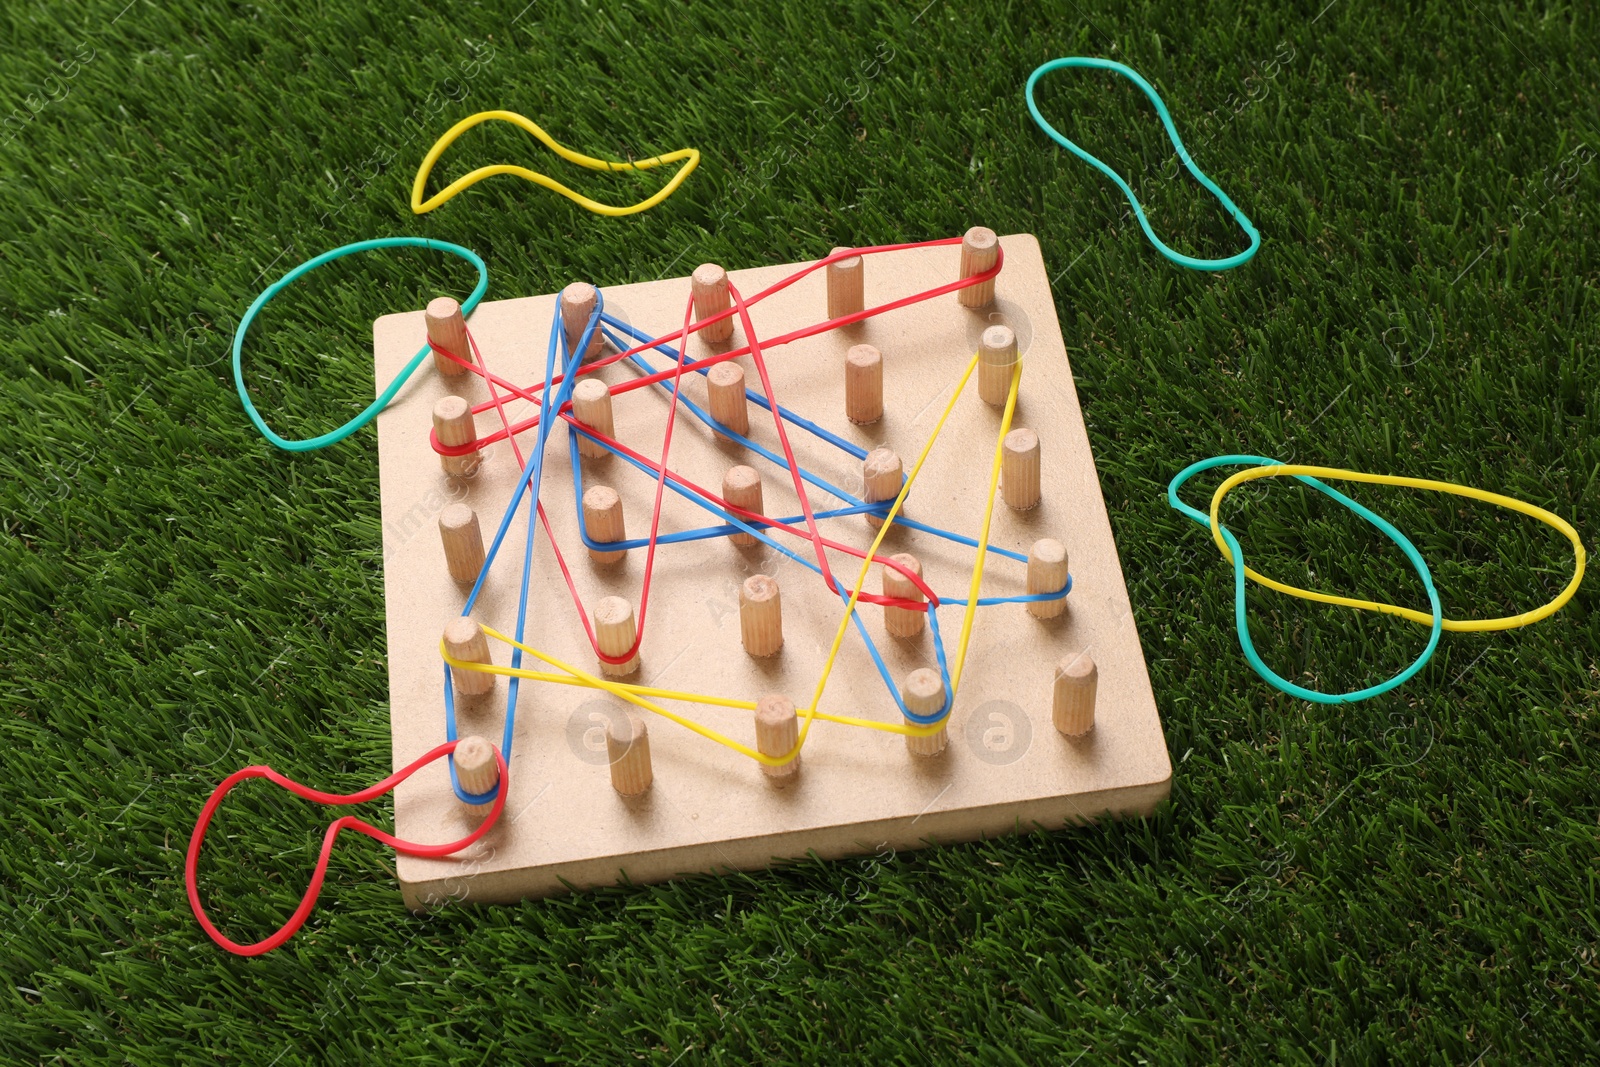 Photo of Wooden geoboard with rubber bands on artificial grass. Educational toy for motor skills development